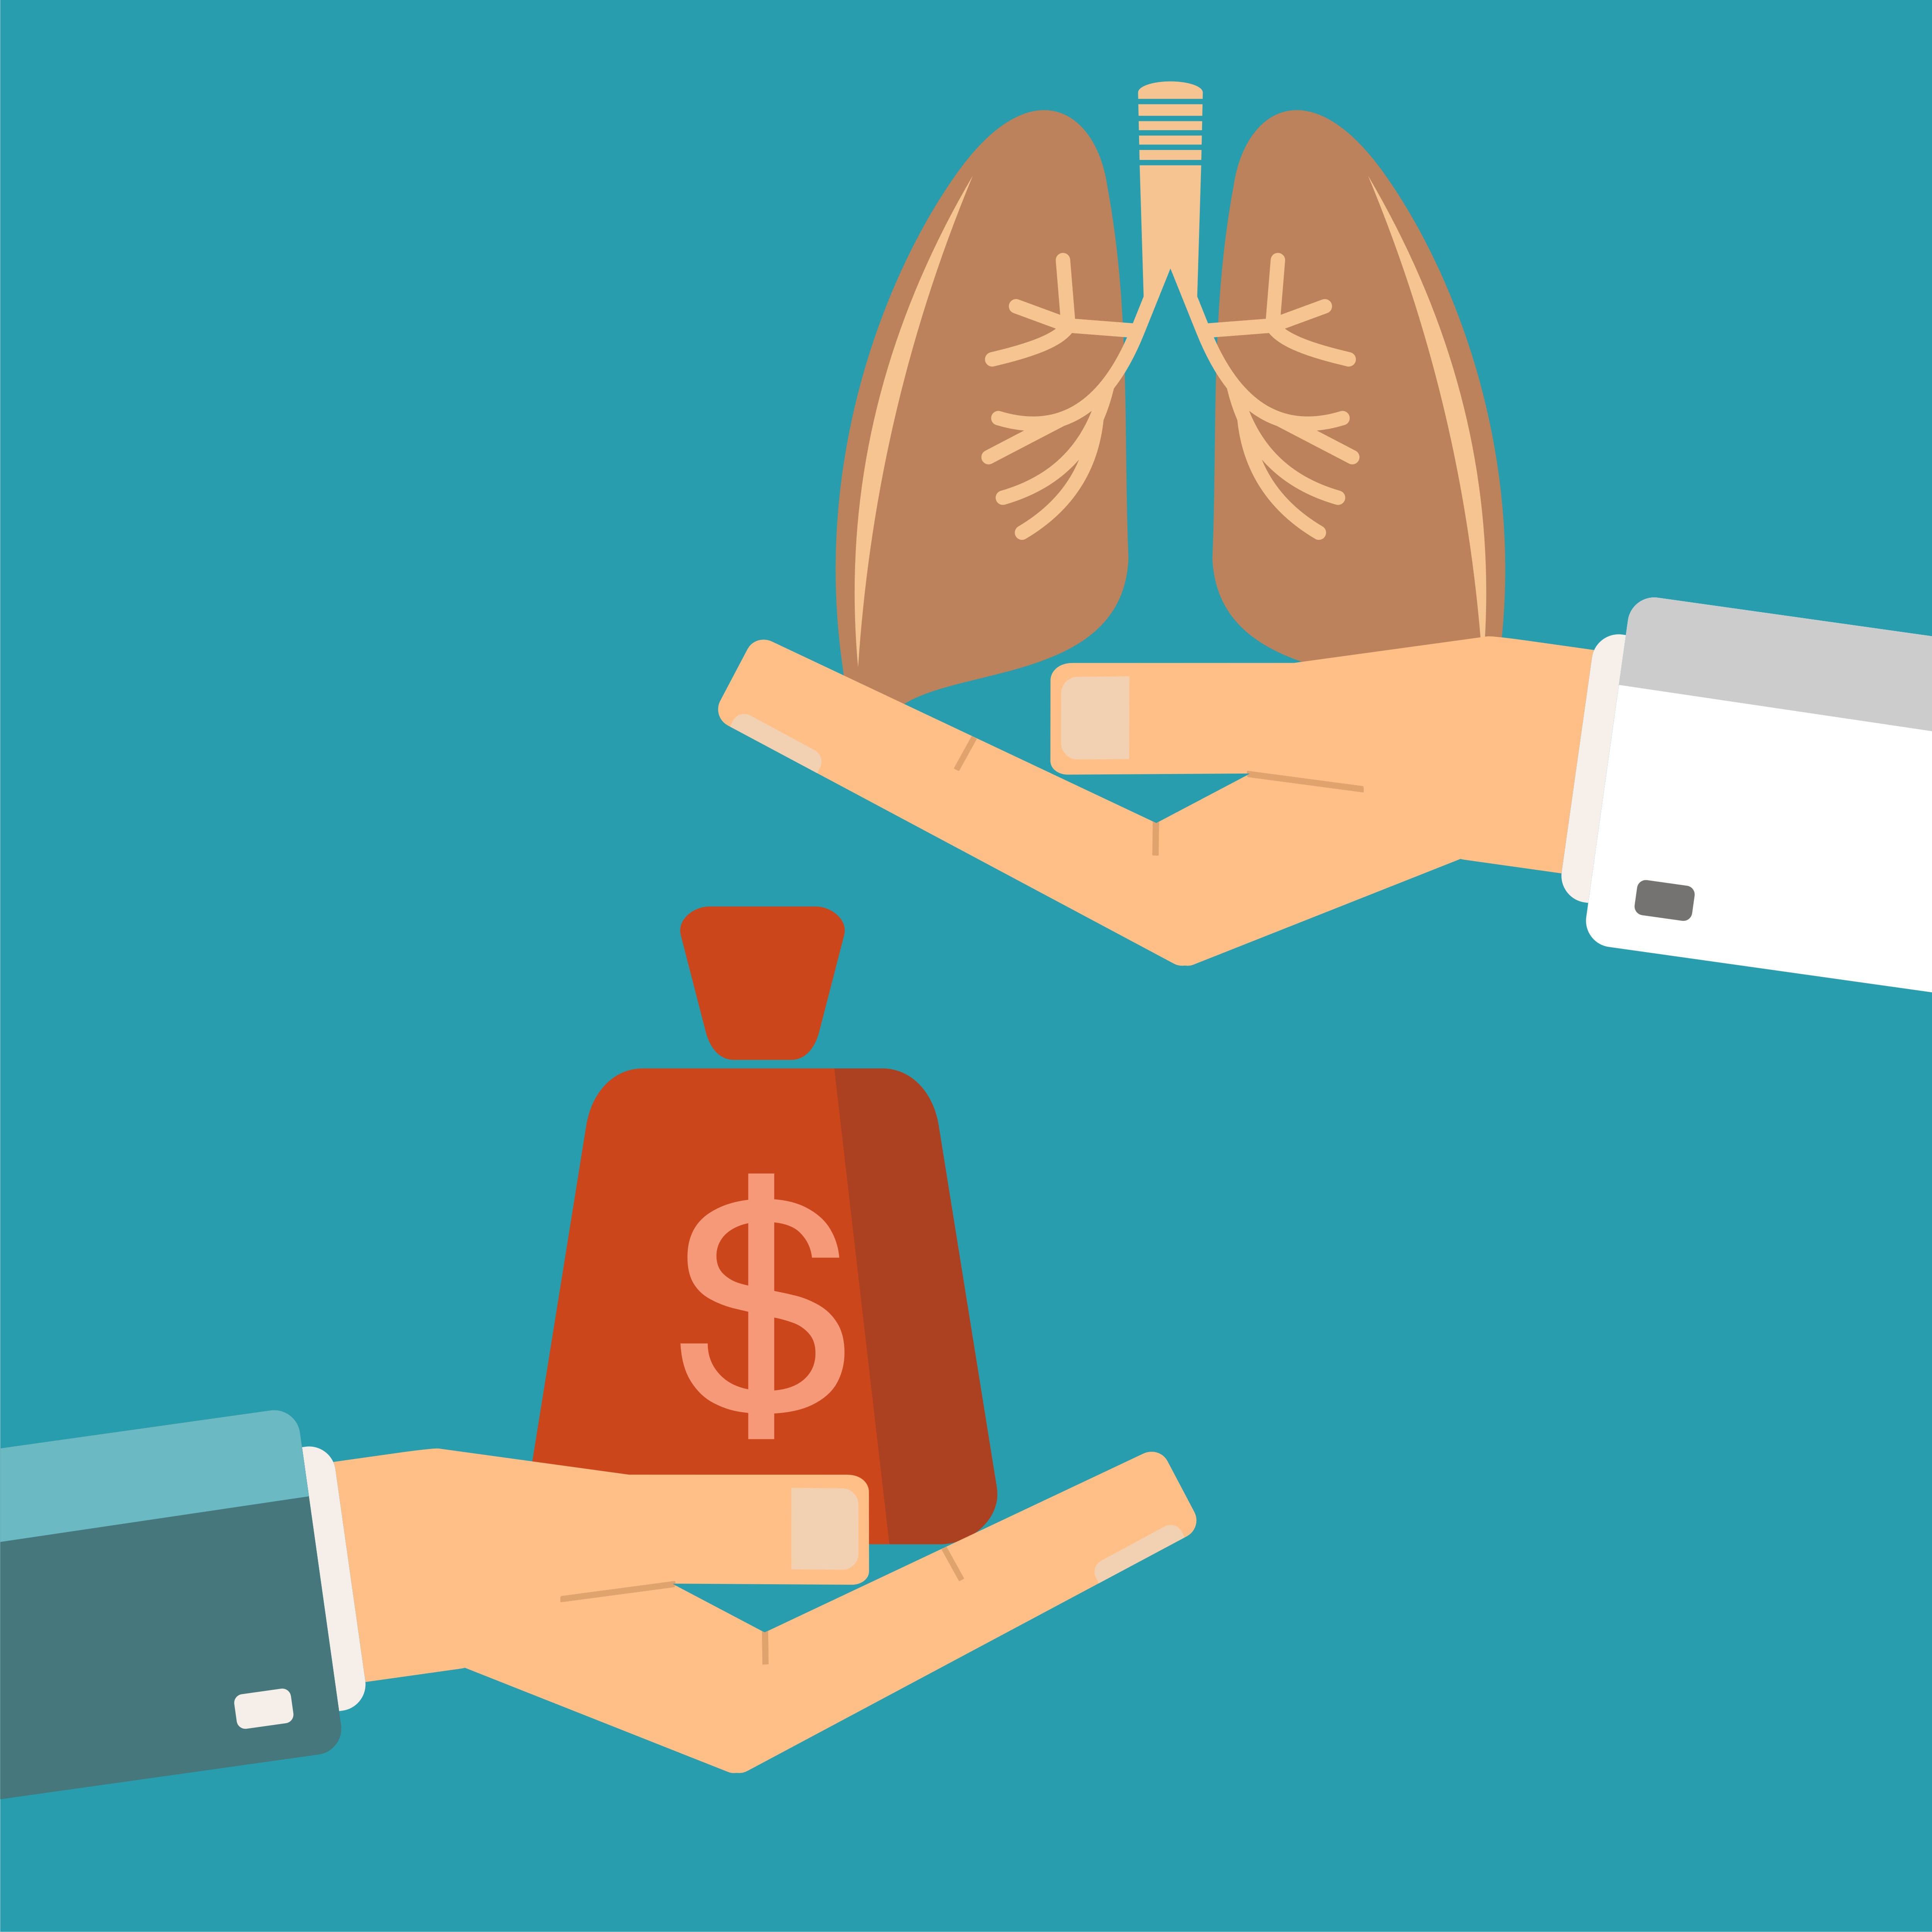 Lung health and money